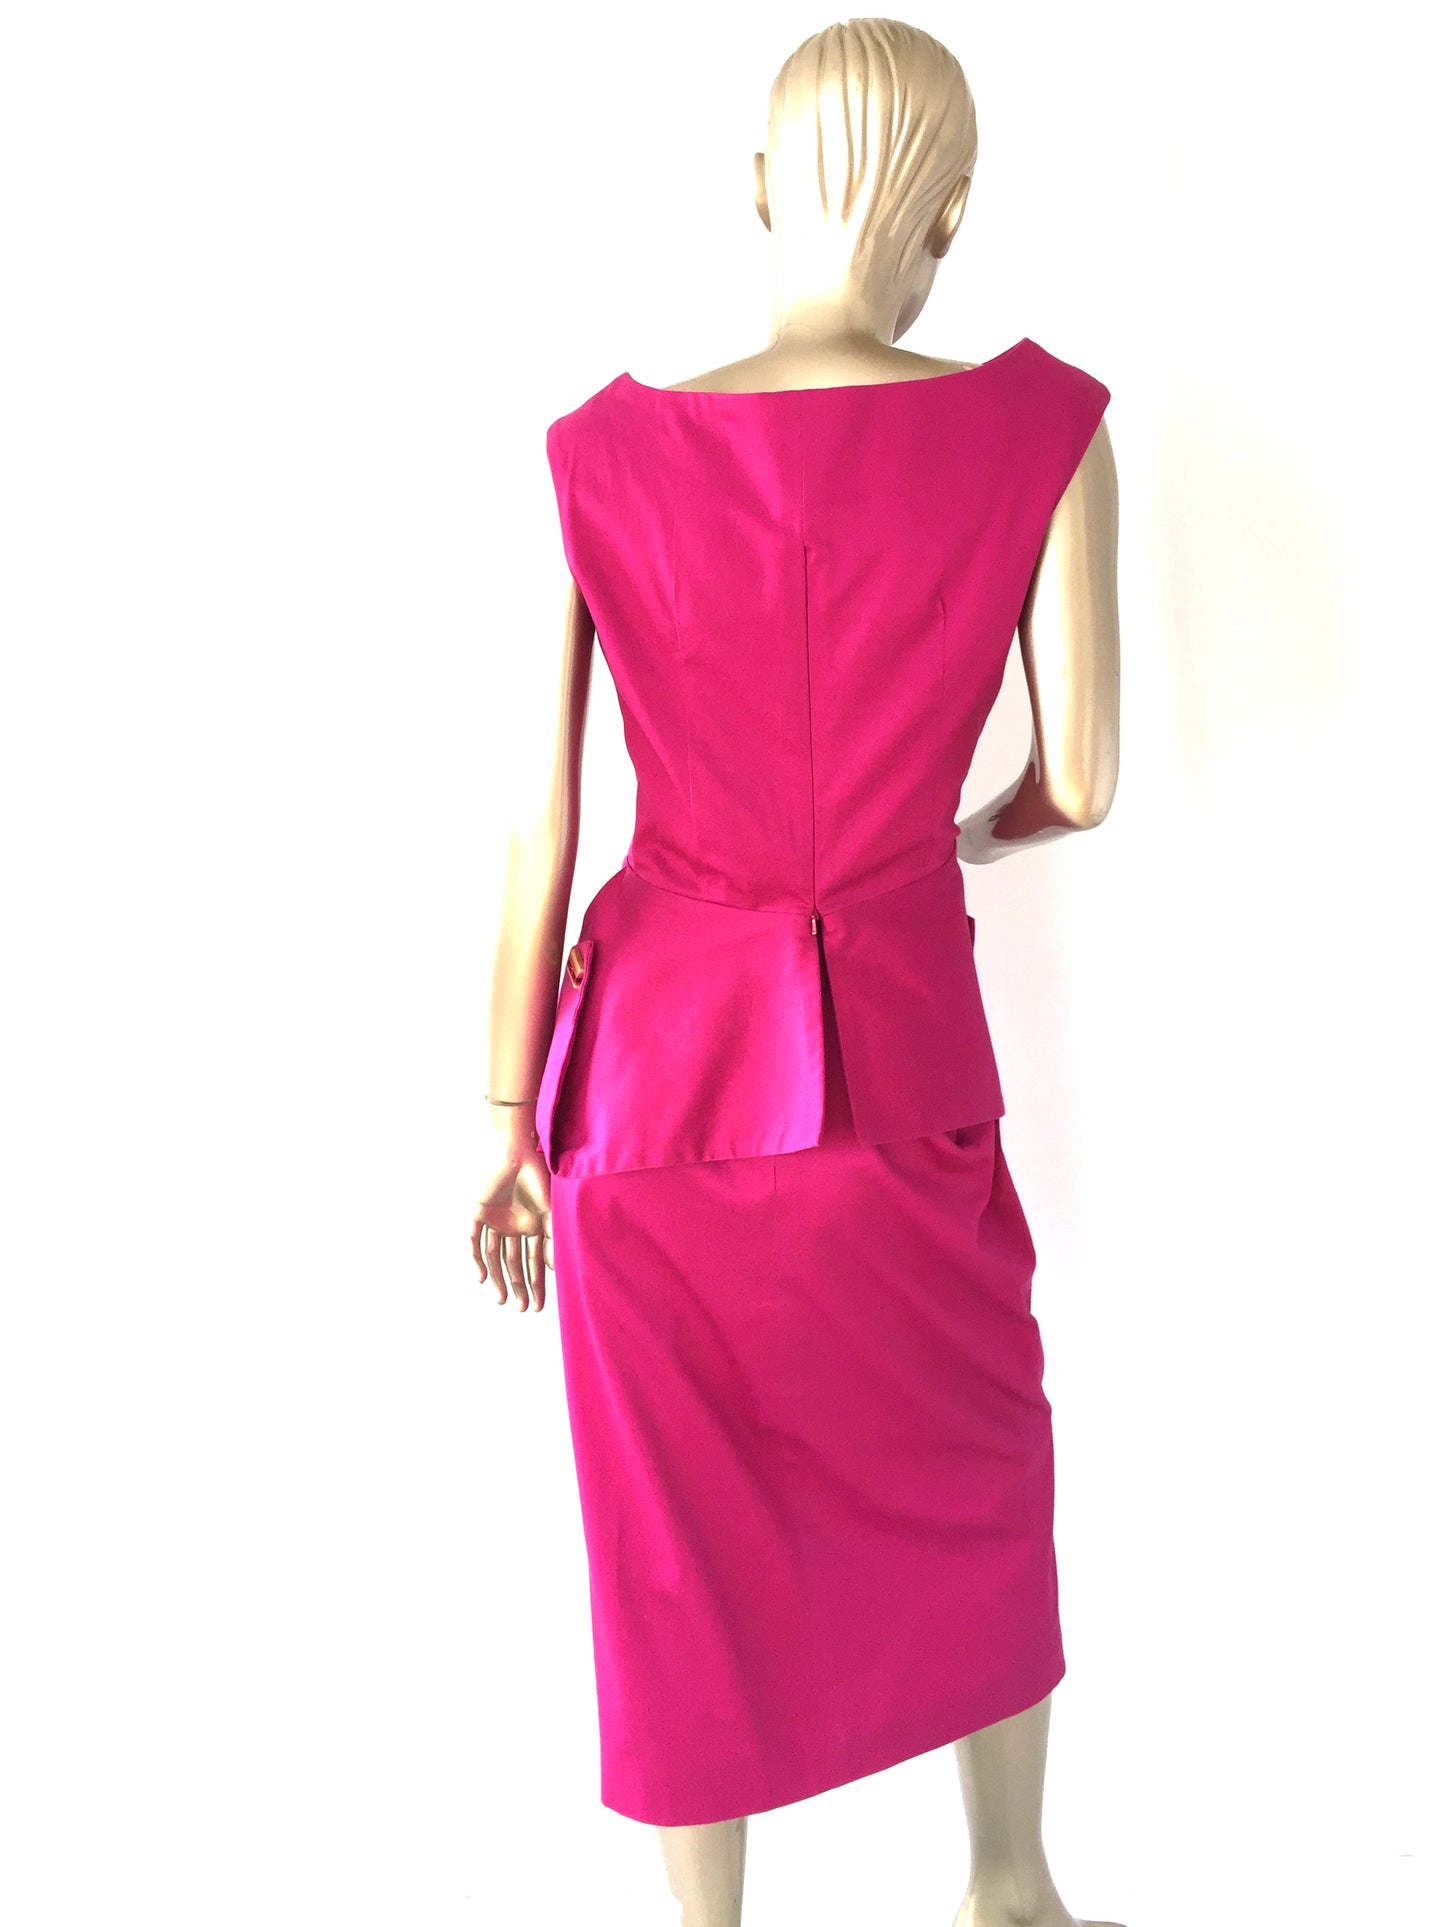 Pencil style skirt with pleats & Peplum style top in hot pink colour.